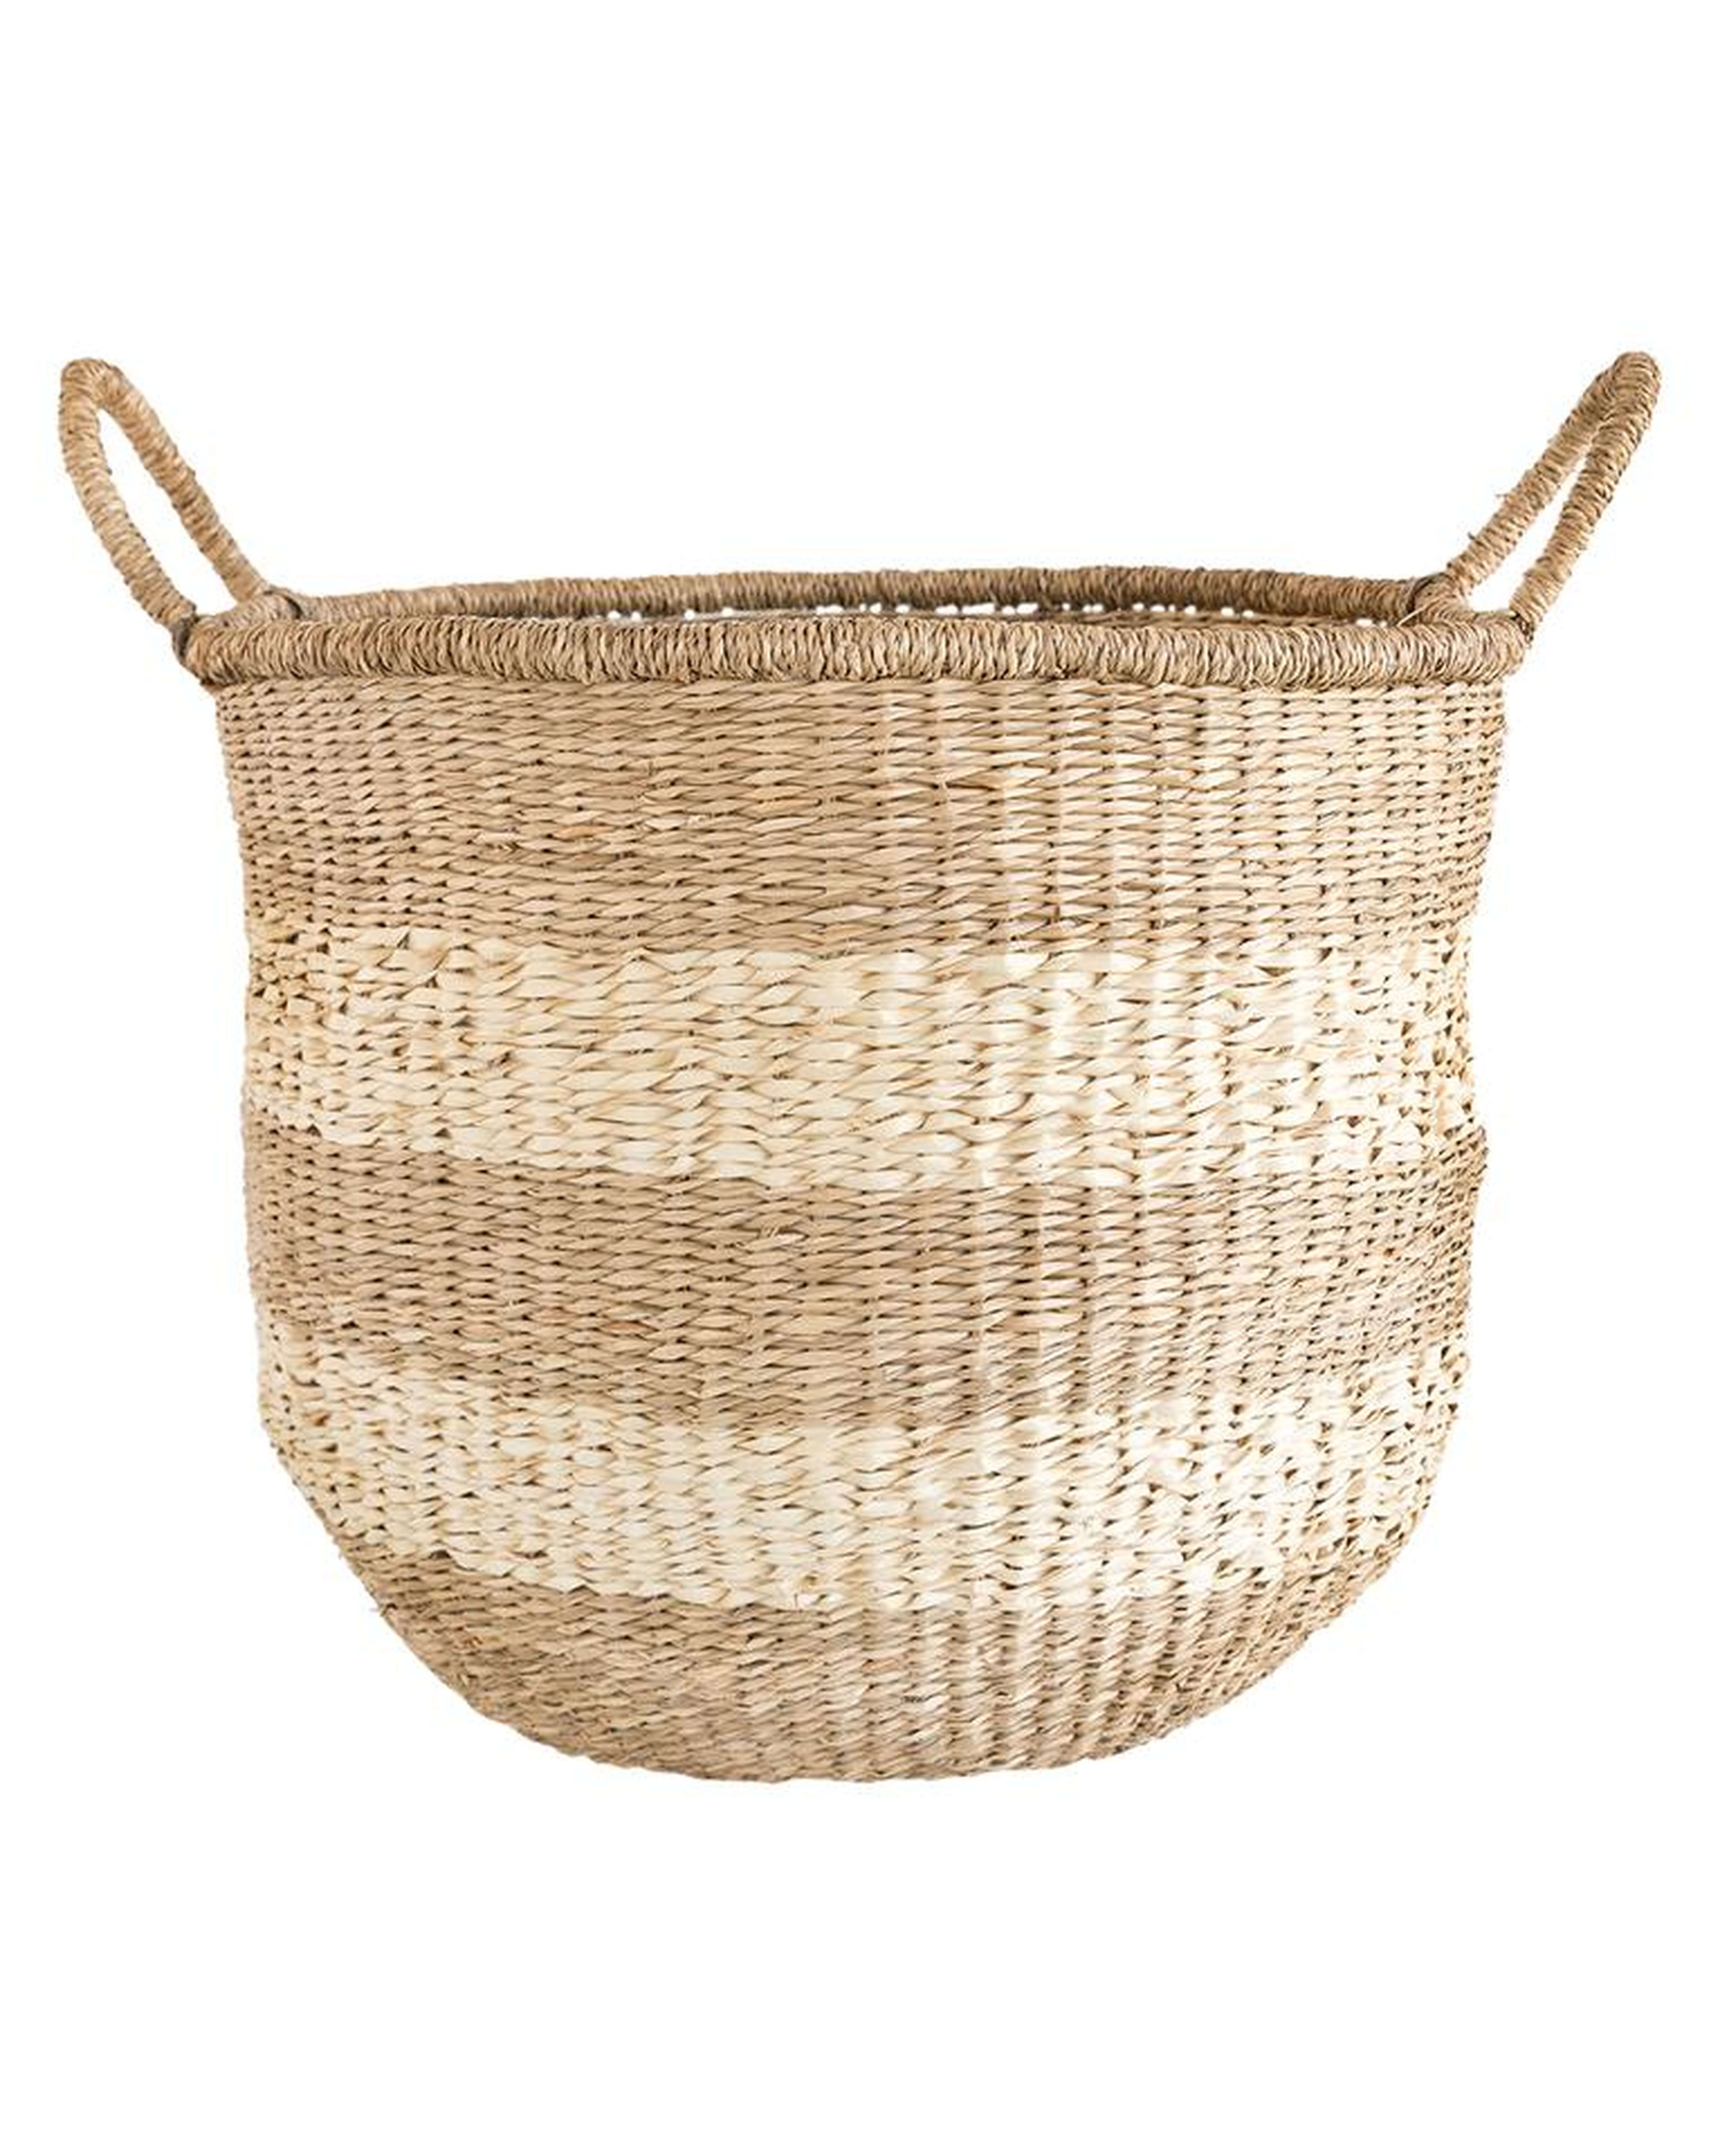 STRIPED ROUND BASKET - SMALL - McGee & Co.